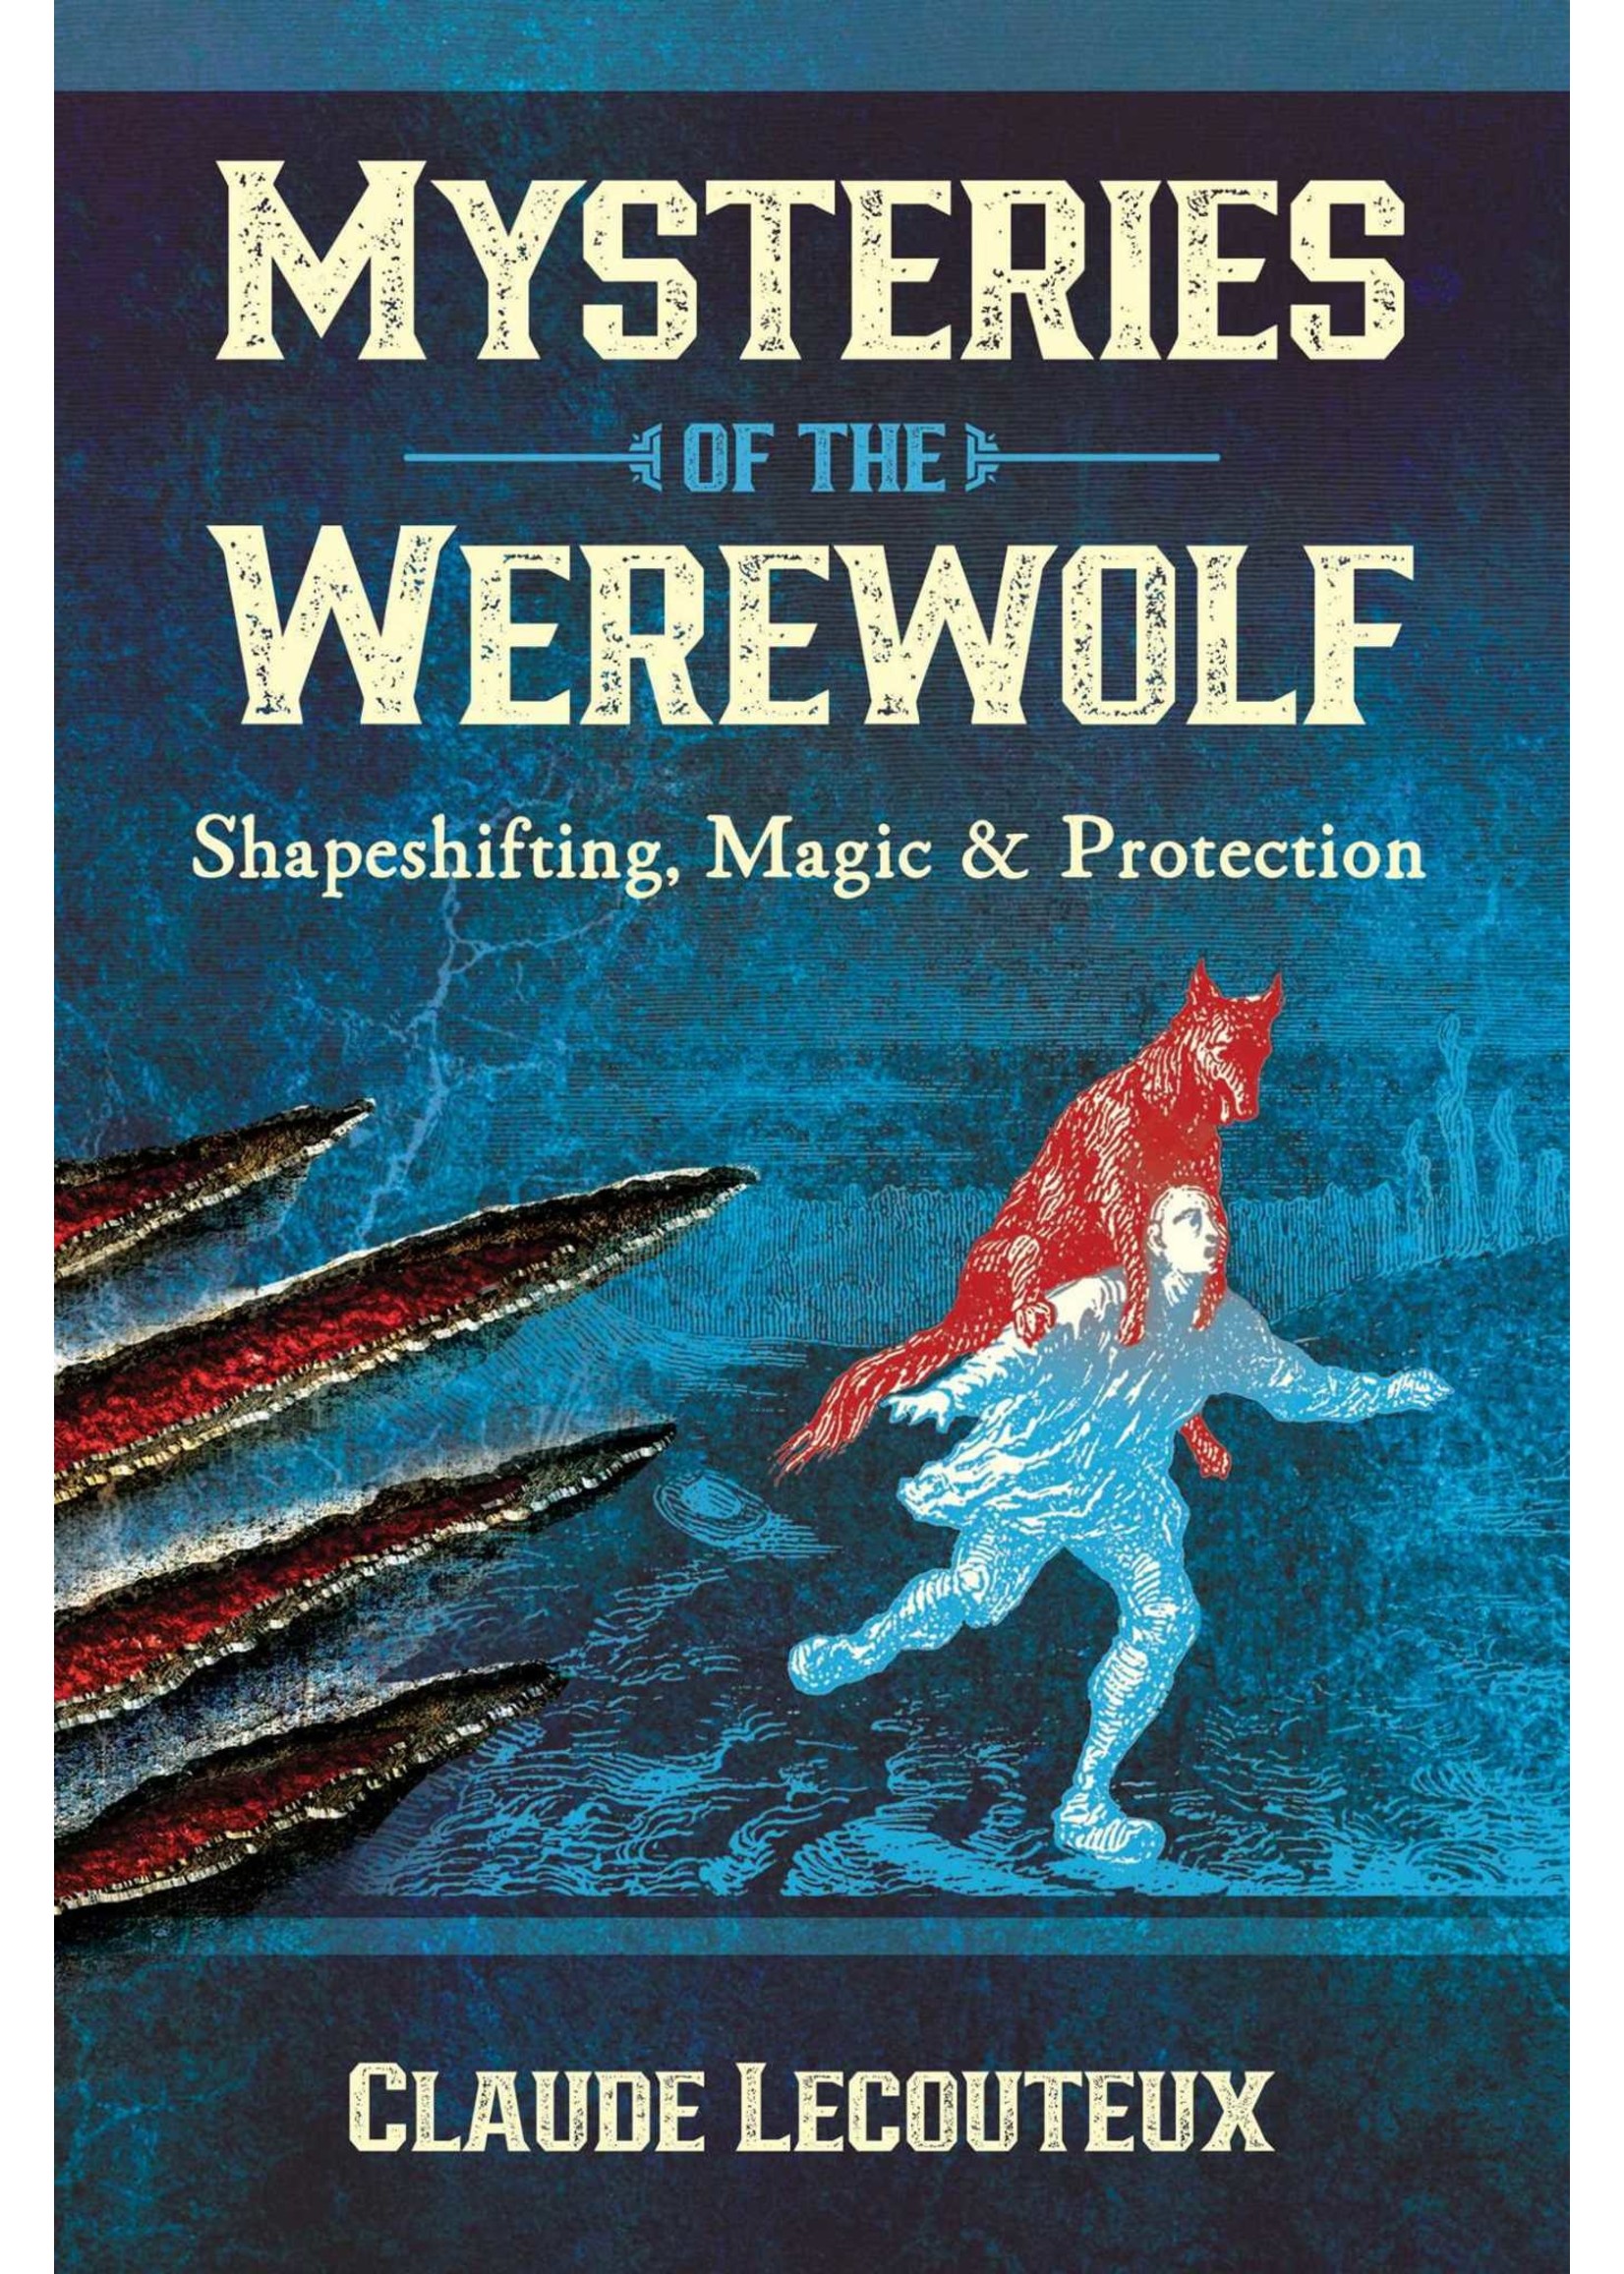 Mysteries of the Werewolf: Shapeshifting, Magic, and Protection by Claude Lecouteux